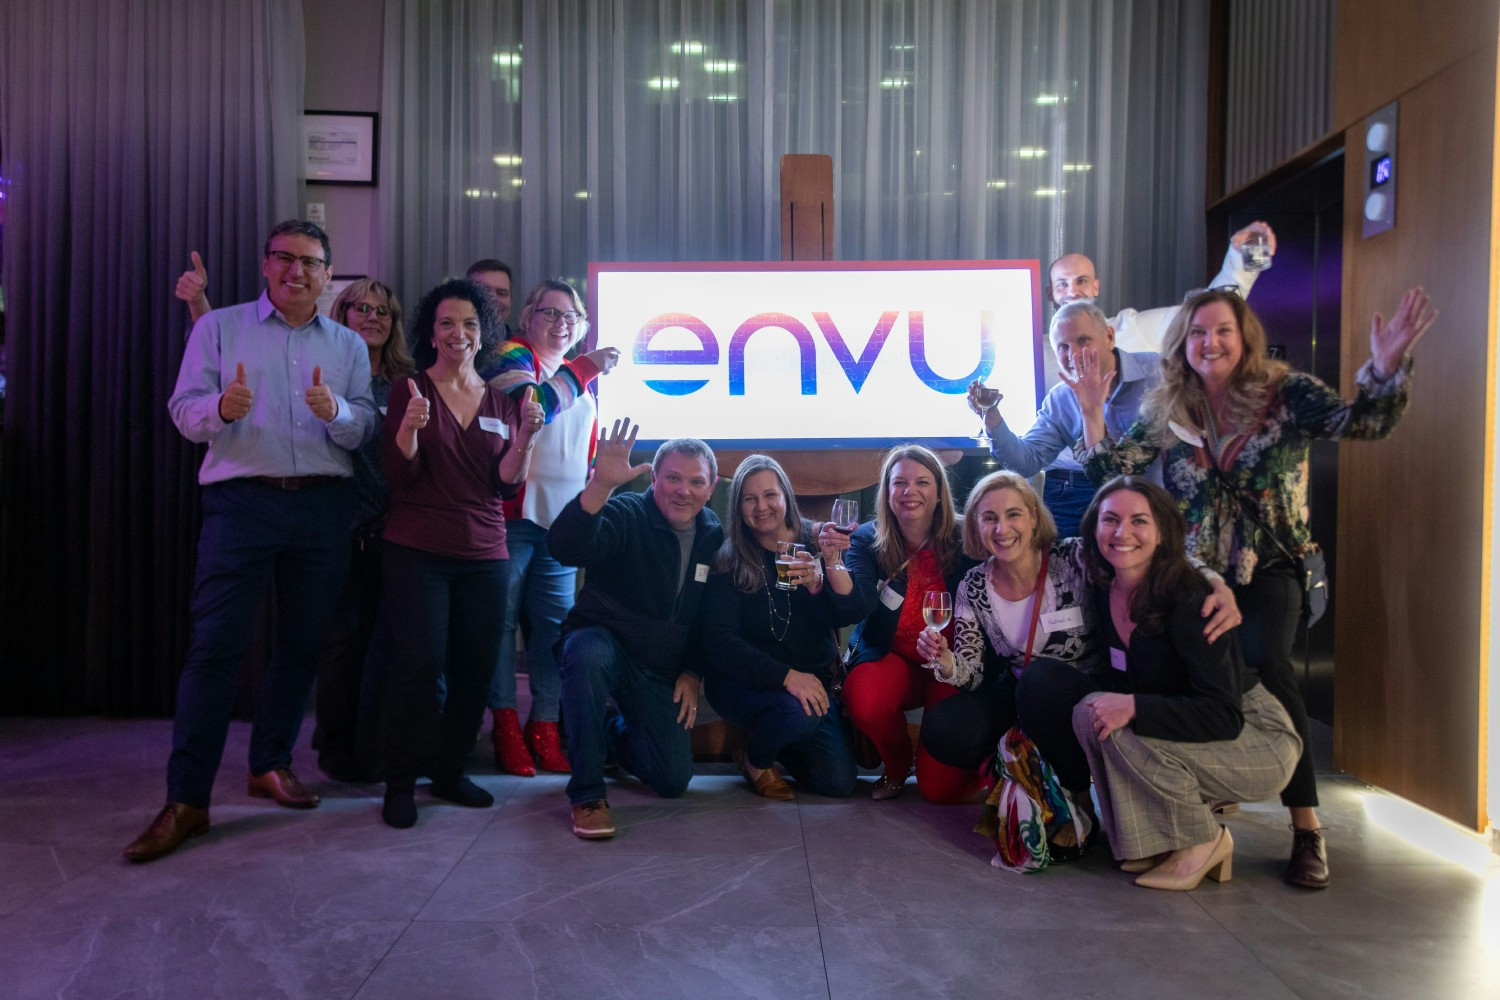 Employees gather around puzzle sign where each employee added a piece to complete the Envu logo as part of launch event.